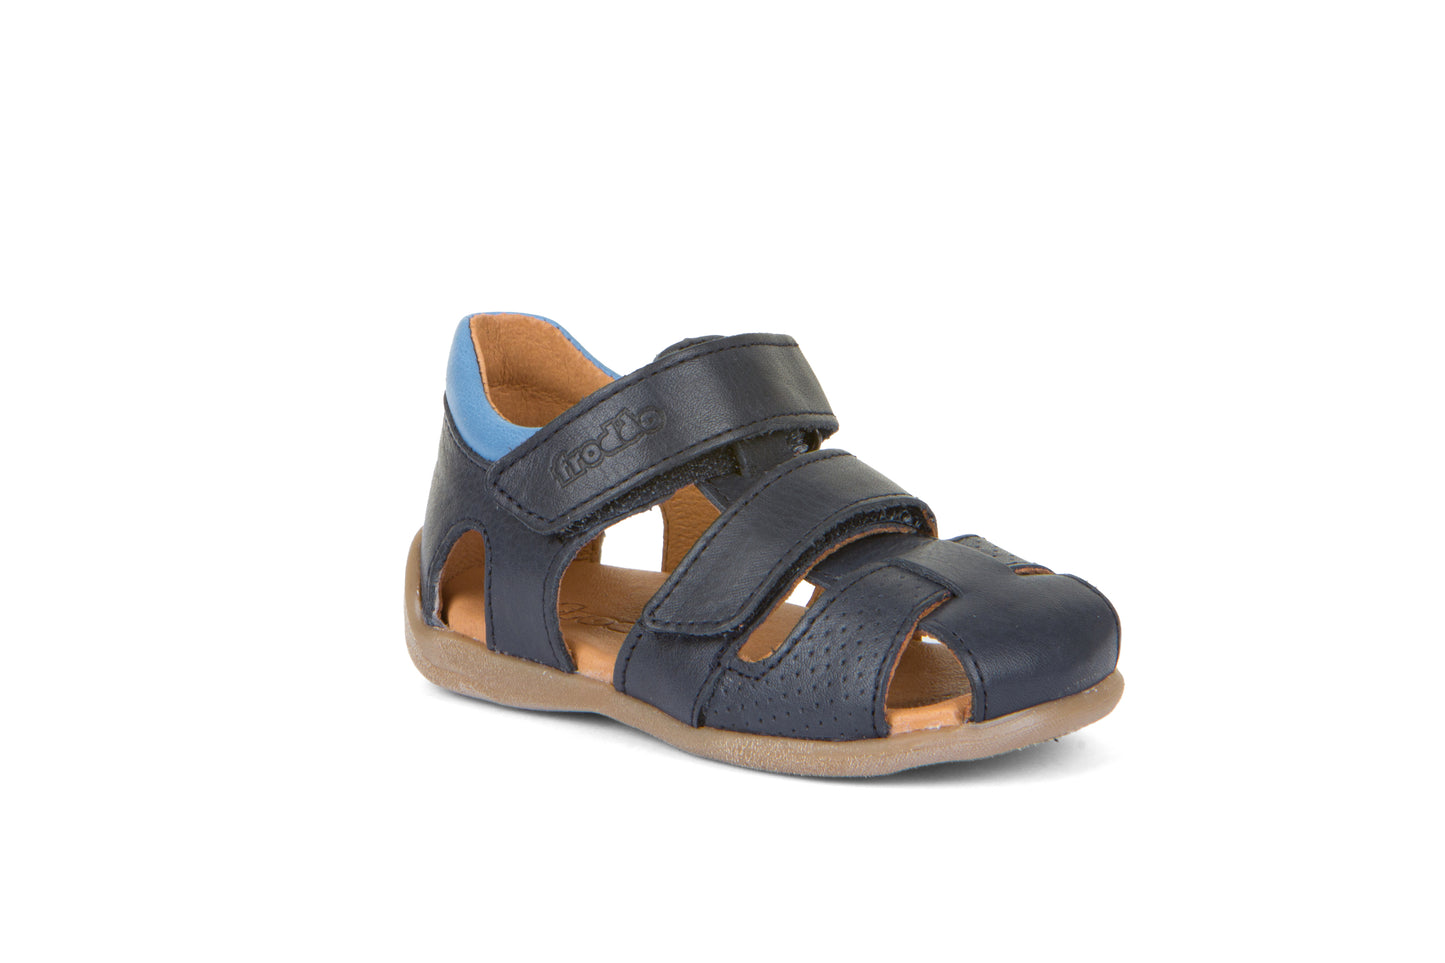 A boys closed toe sandal by Froddo, style G2150169 Carte Double, in navy with light blue collar, velcro fastening. Angled view.